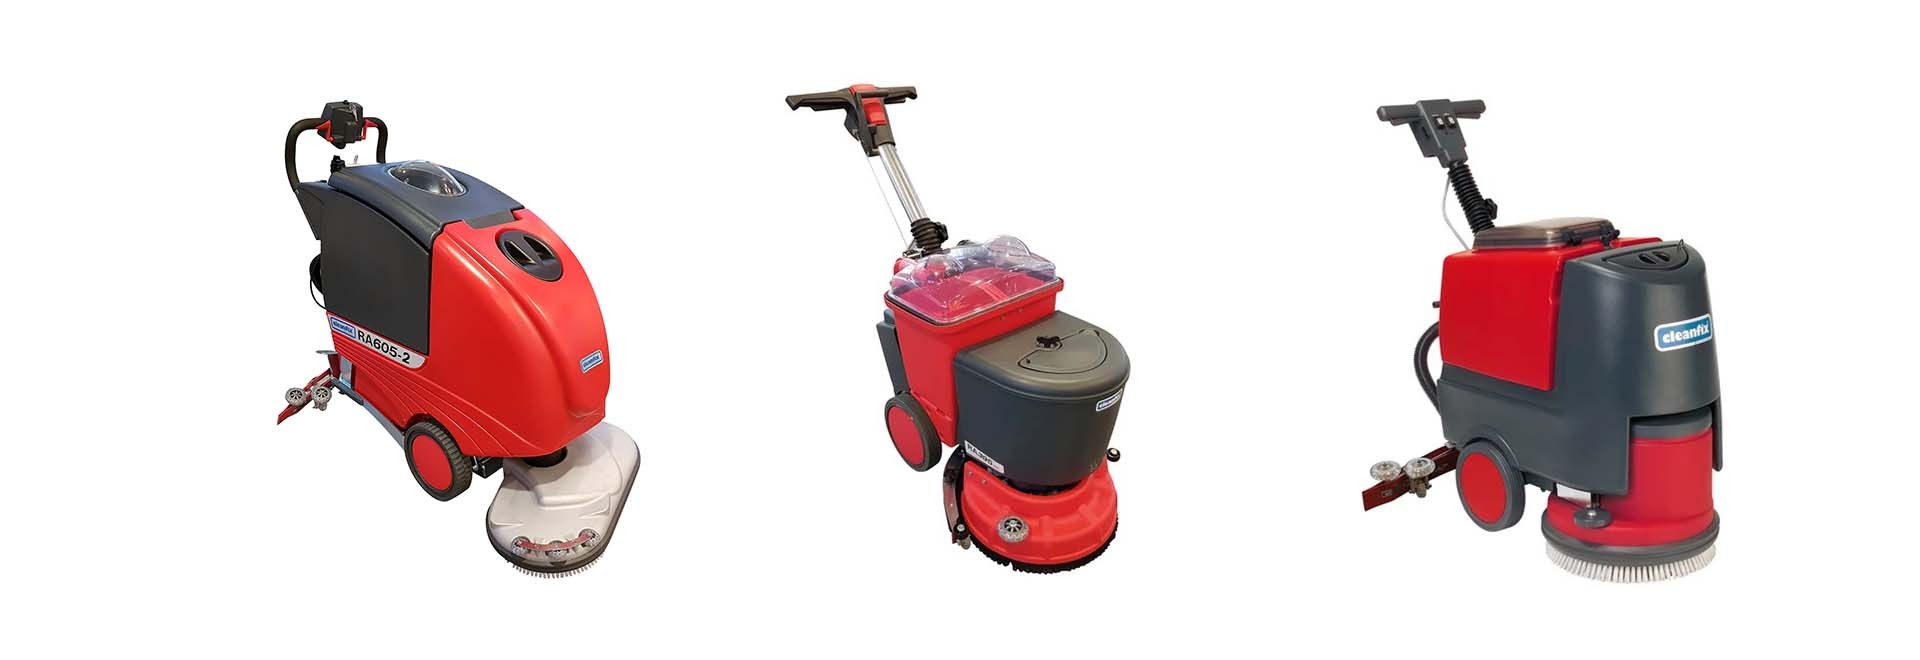 Scrubber Dryer - Cleaning